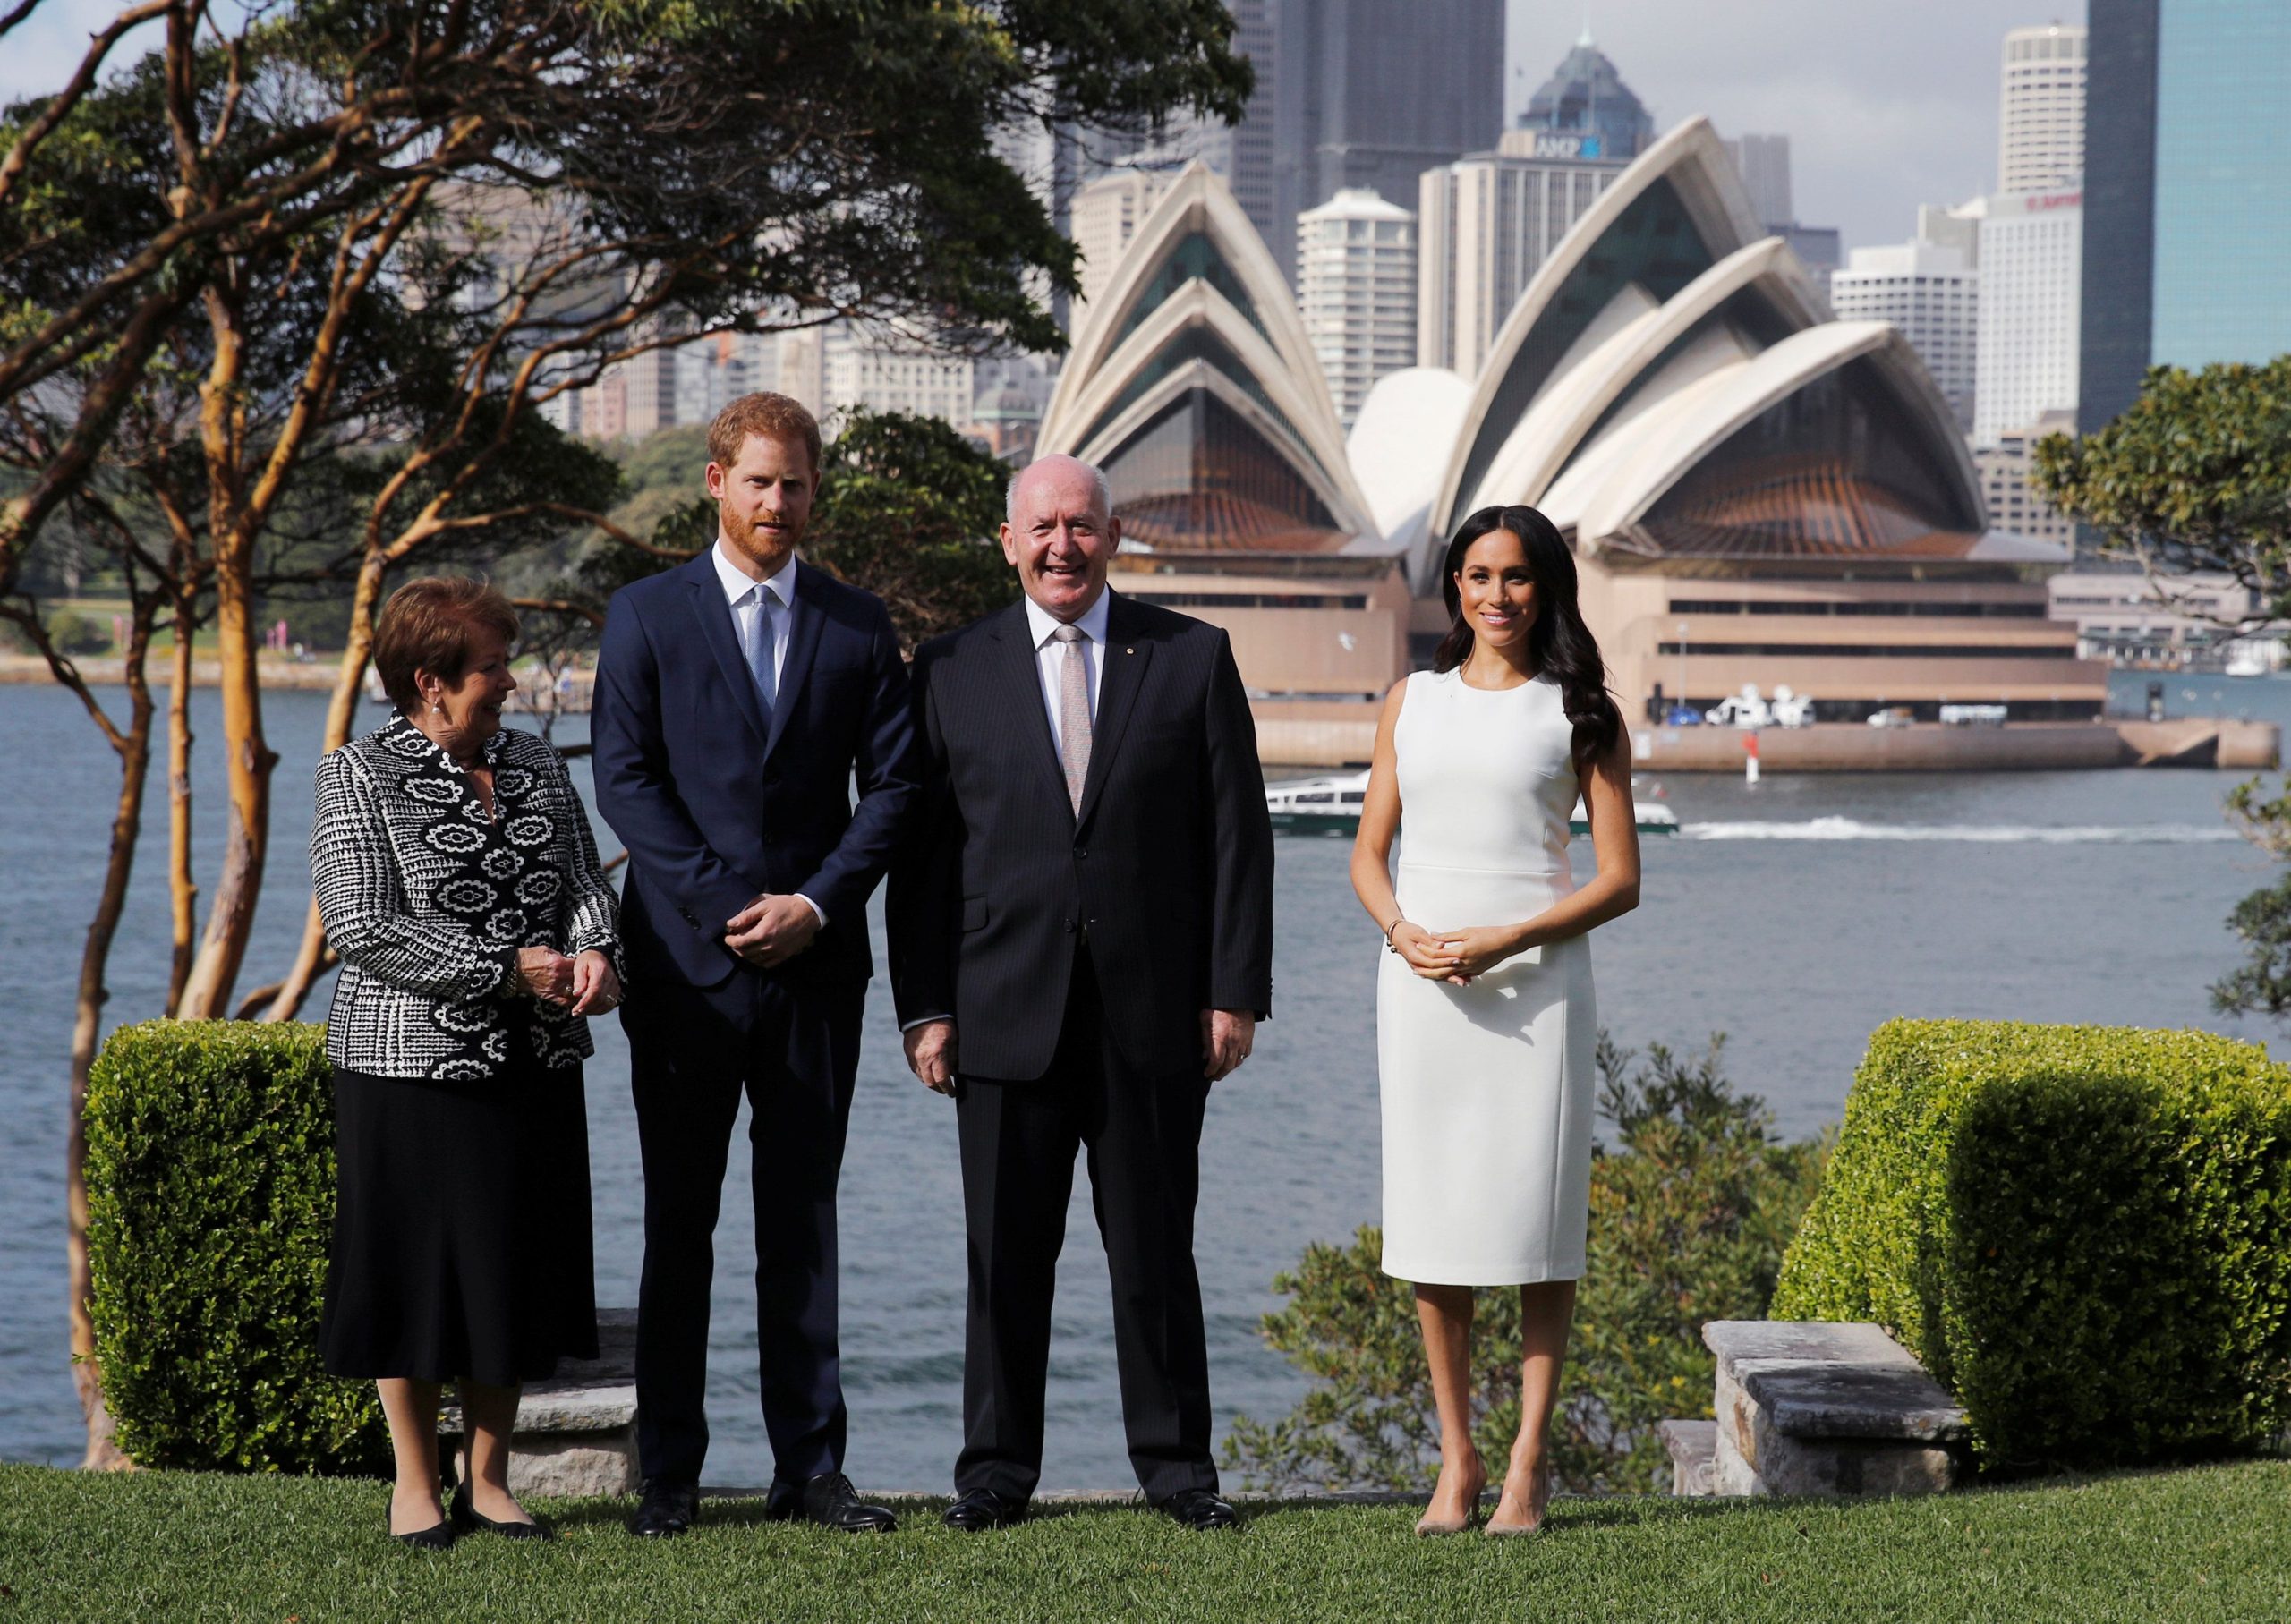 Meghan Markle and Prince Harry during their first royal tour of Australia